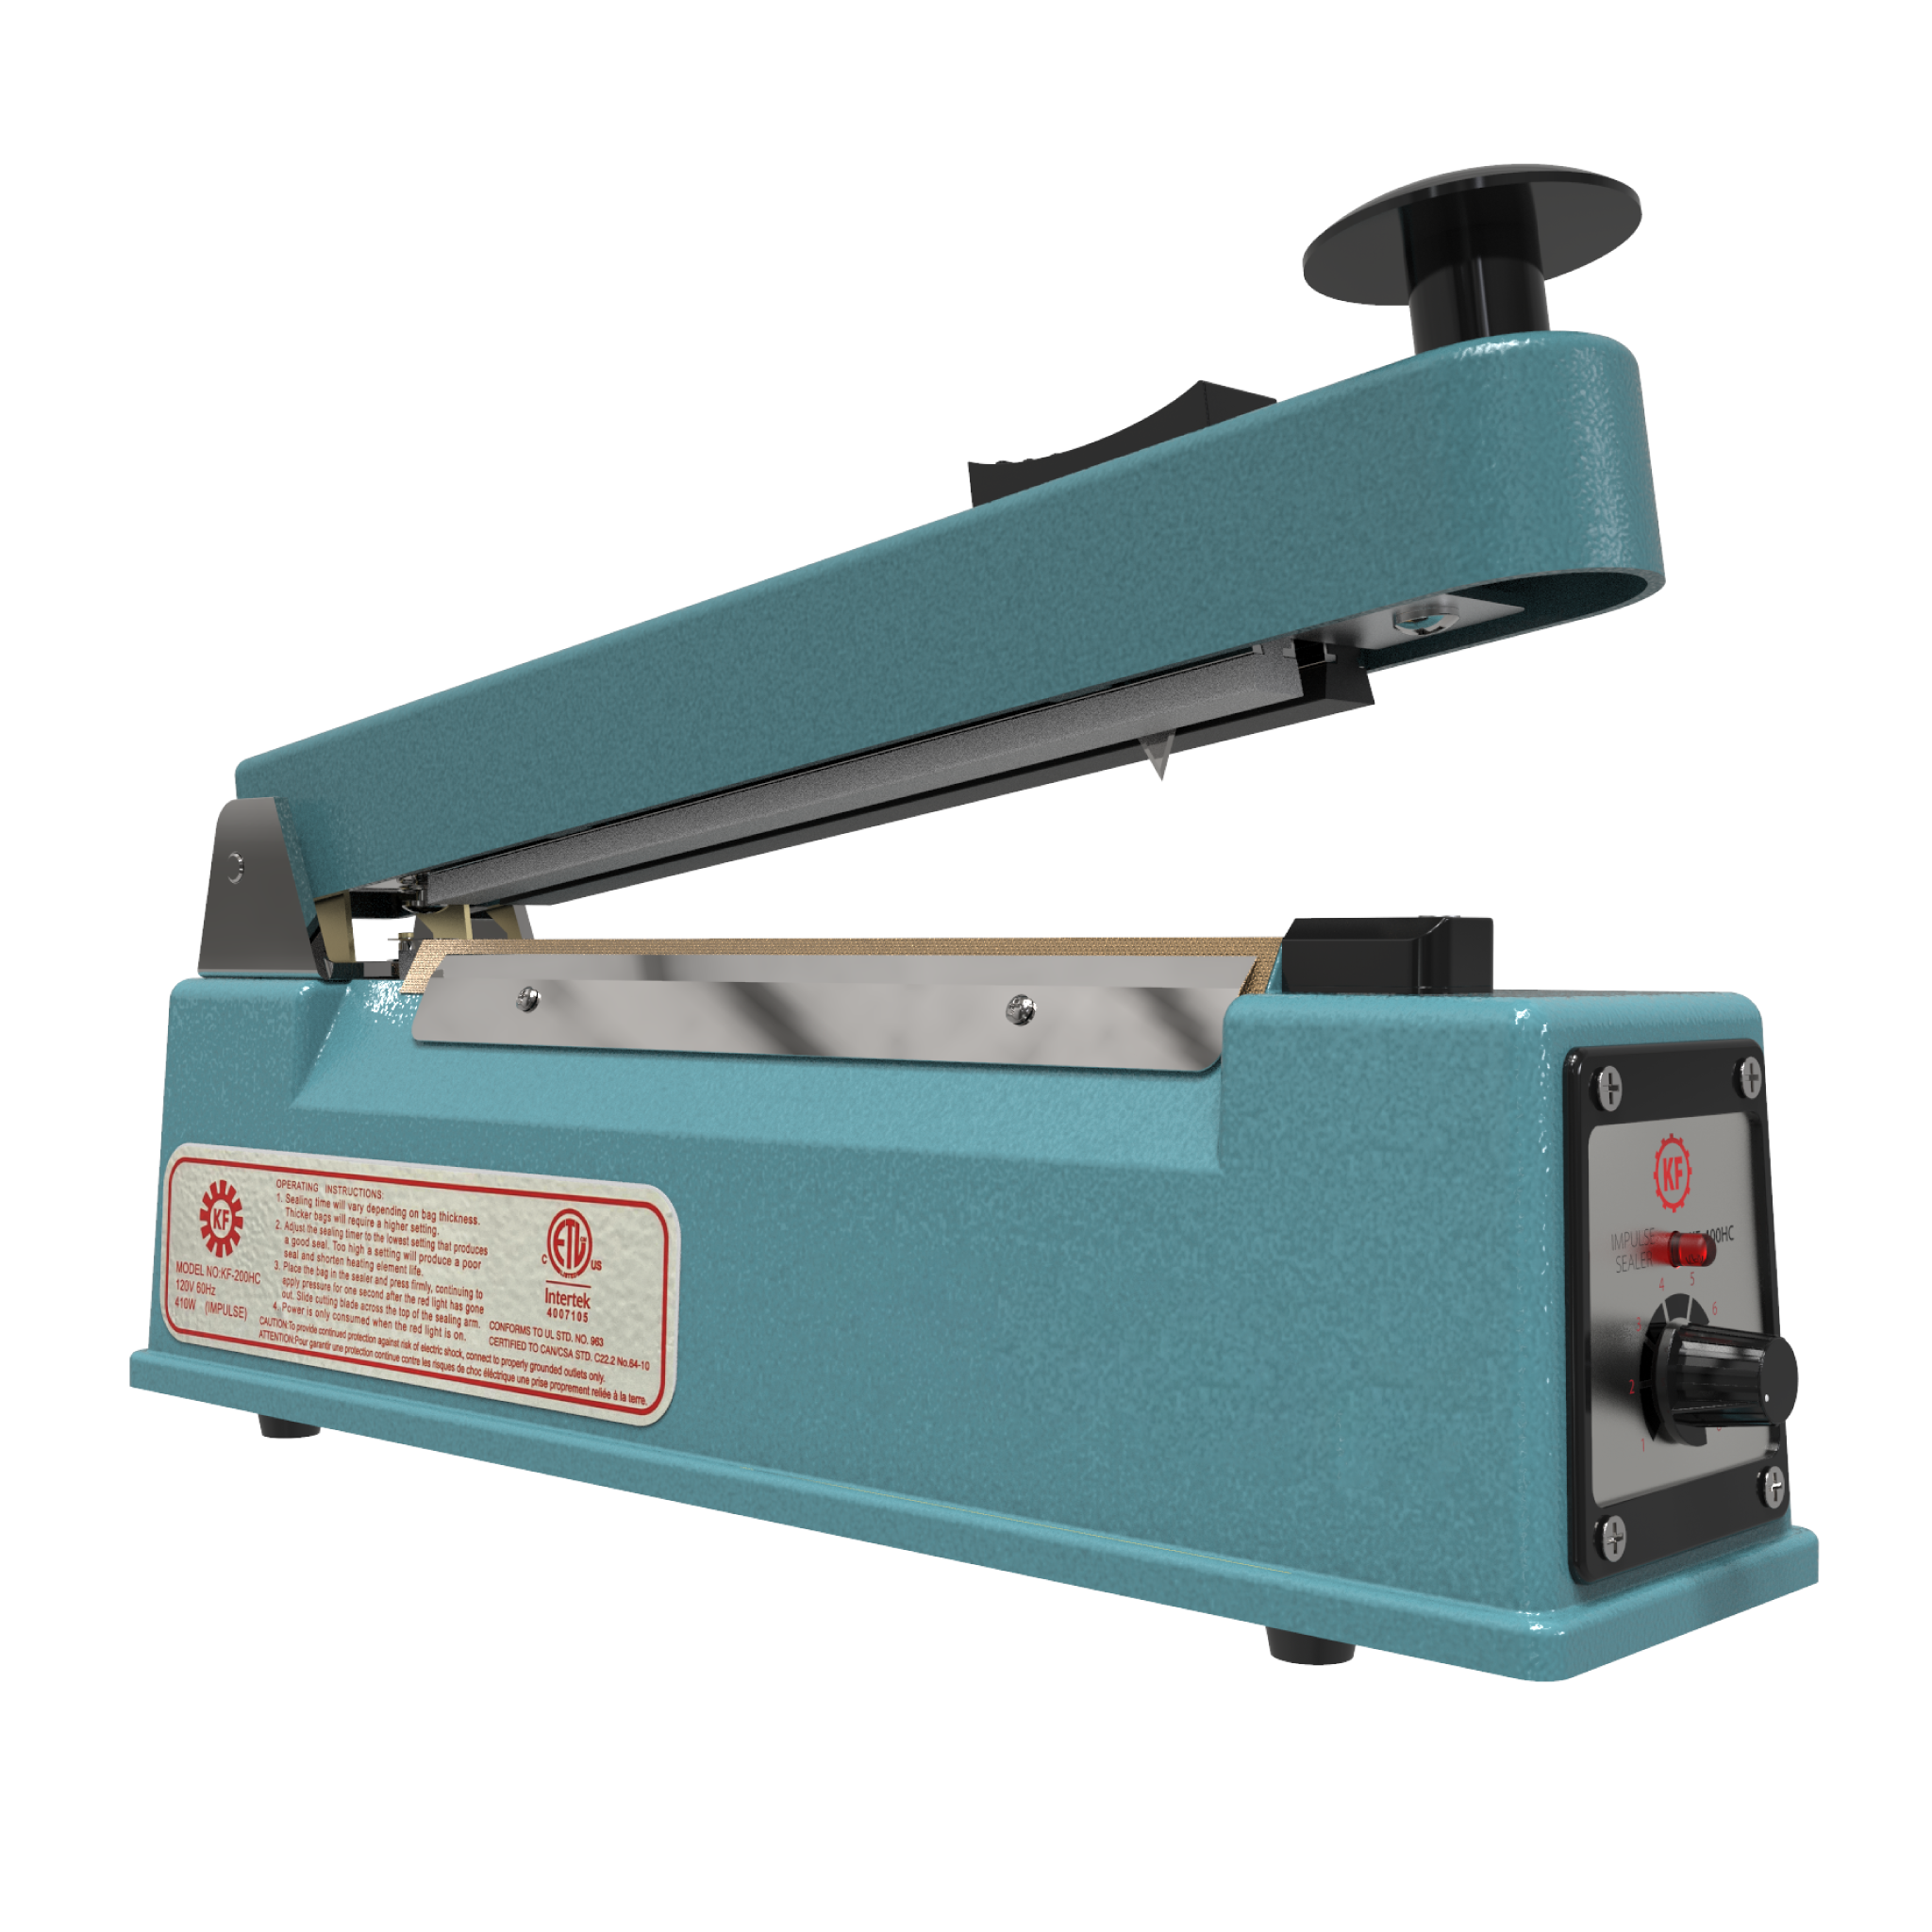 https://cdn.shopify.com/s/files/1/0517/5692/5094/products/12-INCH-MANUAL-IMPULSE-SEALER-WITH-CUTTER-E-KF-300-HC-JORESTECH-H-_1.png?v=1622045191